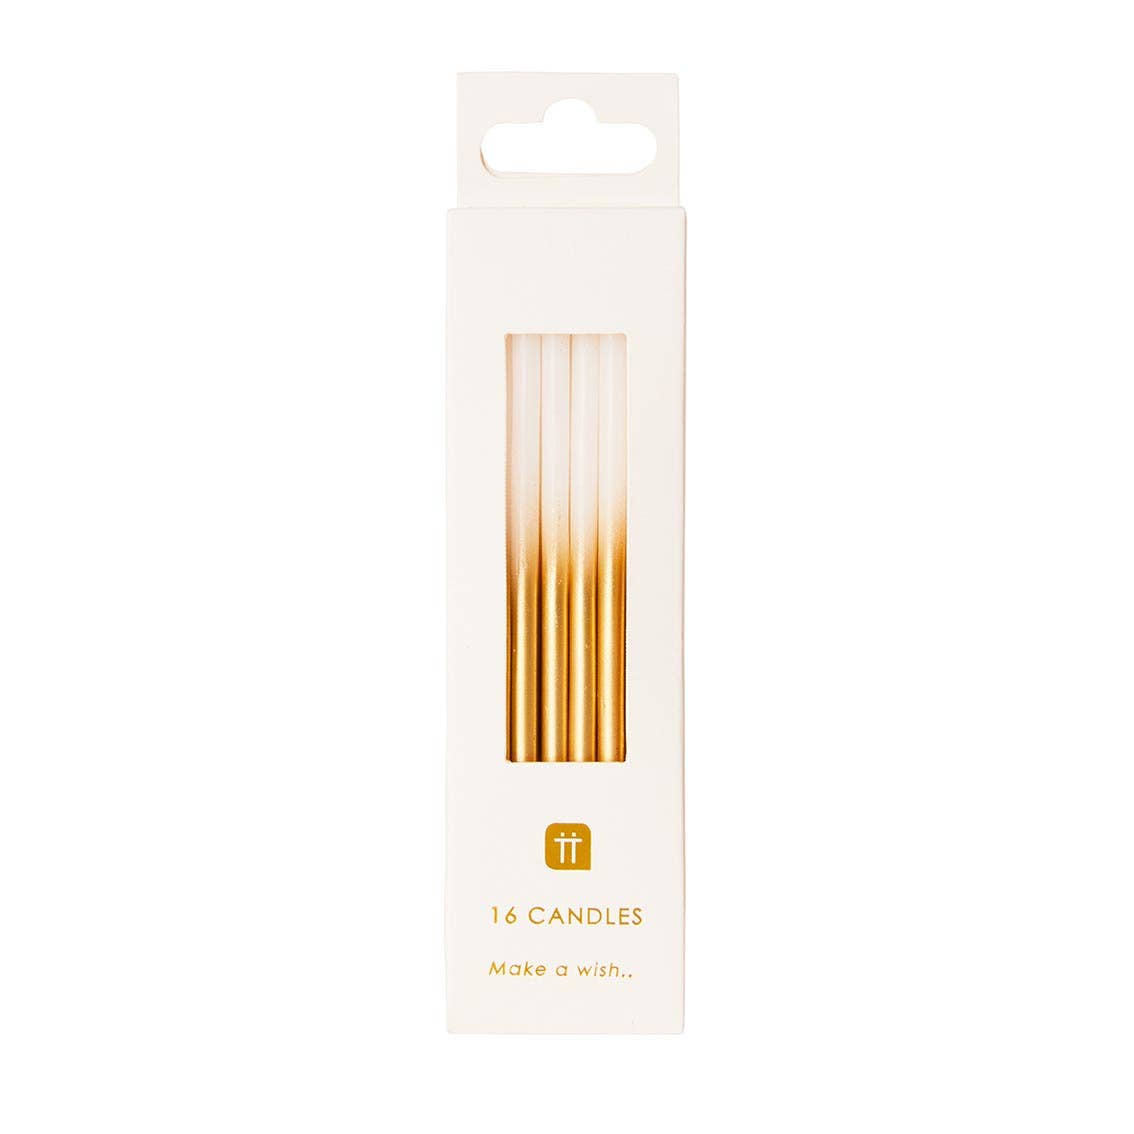 White & Gold Birthday Candles